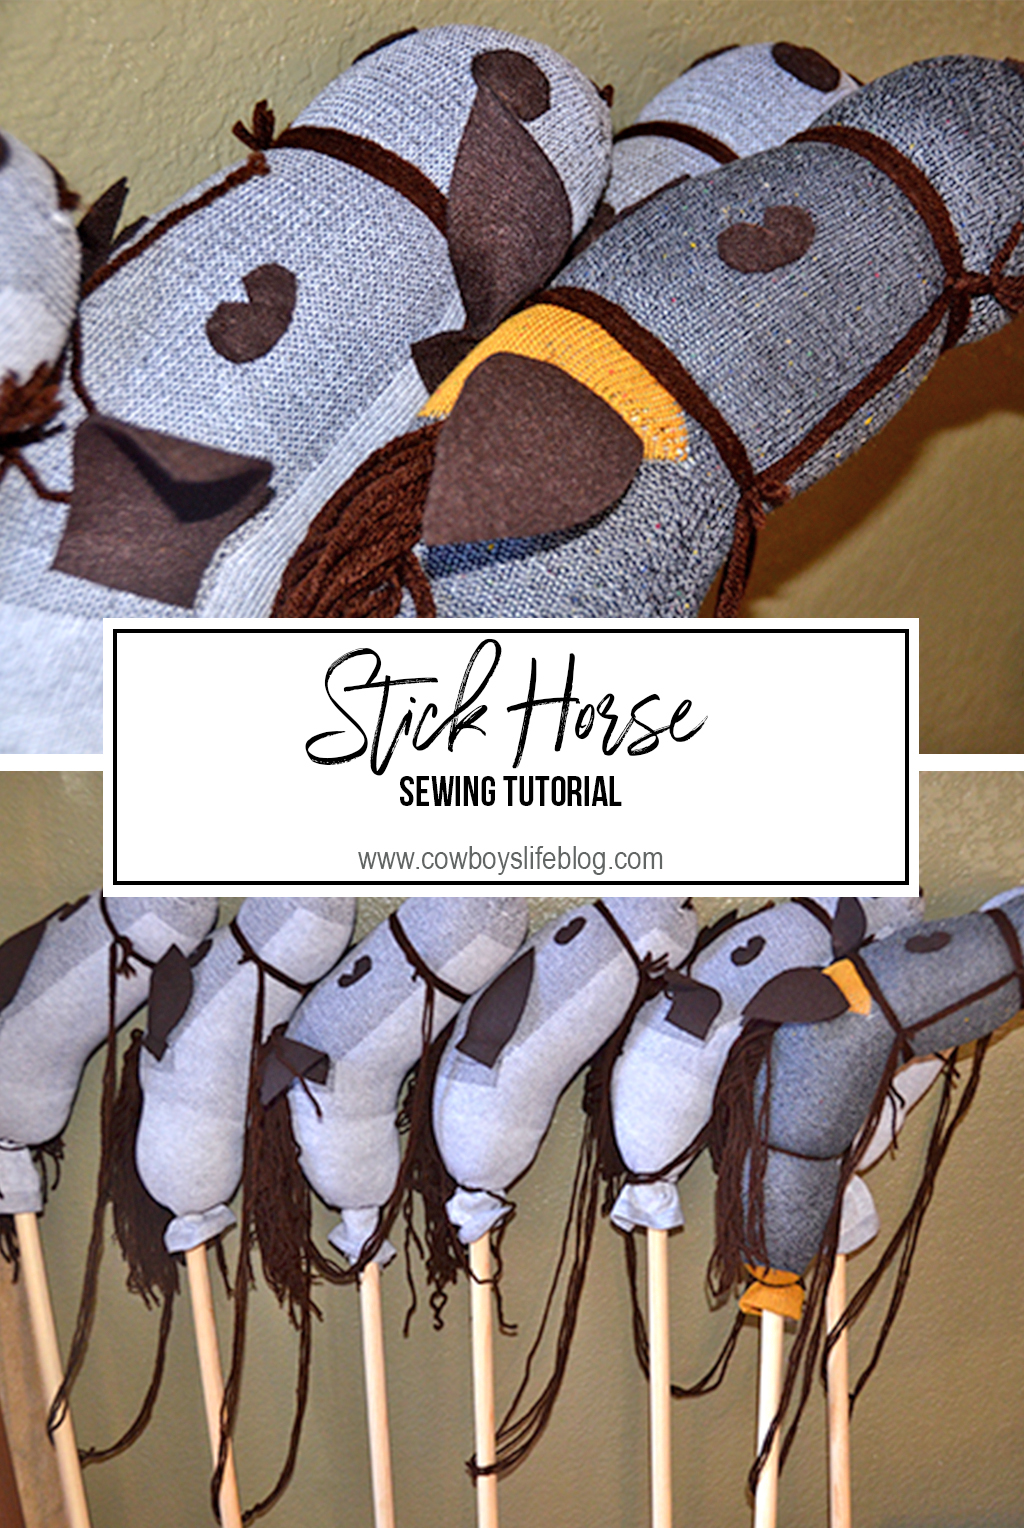 How to make a stick horse